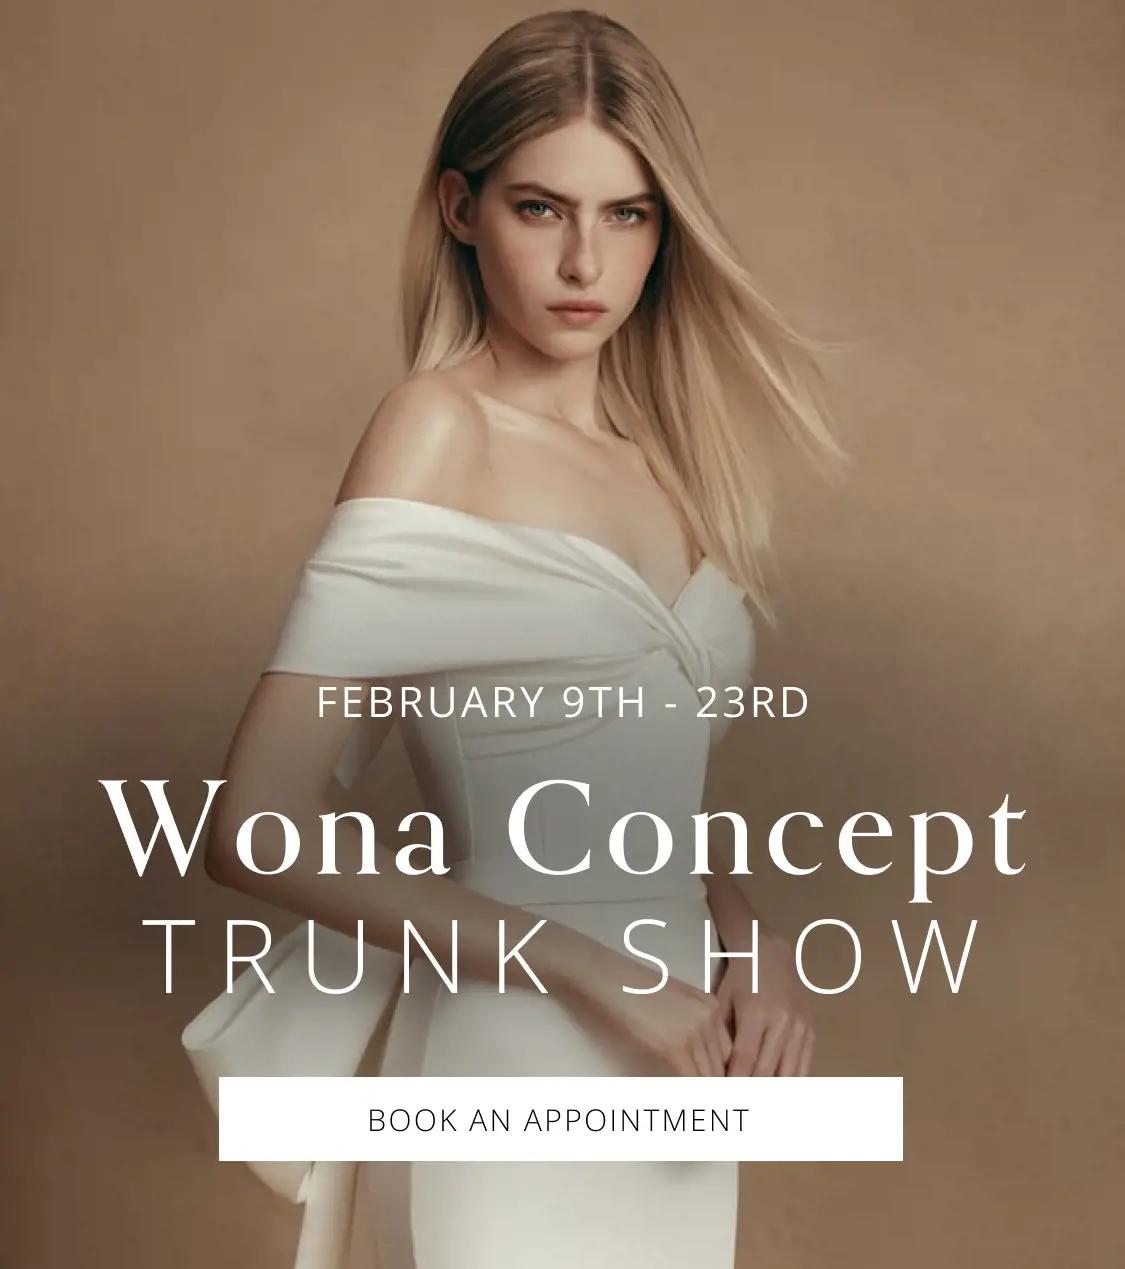 "Wona Concept Trunk Show" banner for mobile